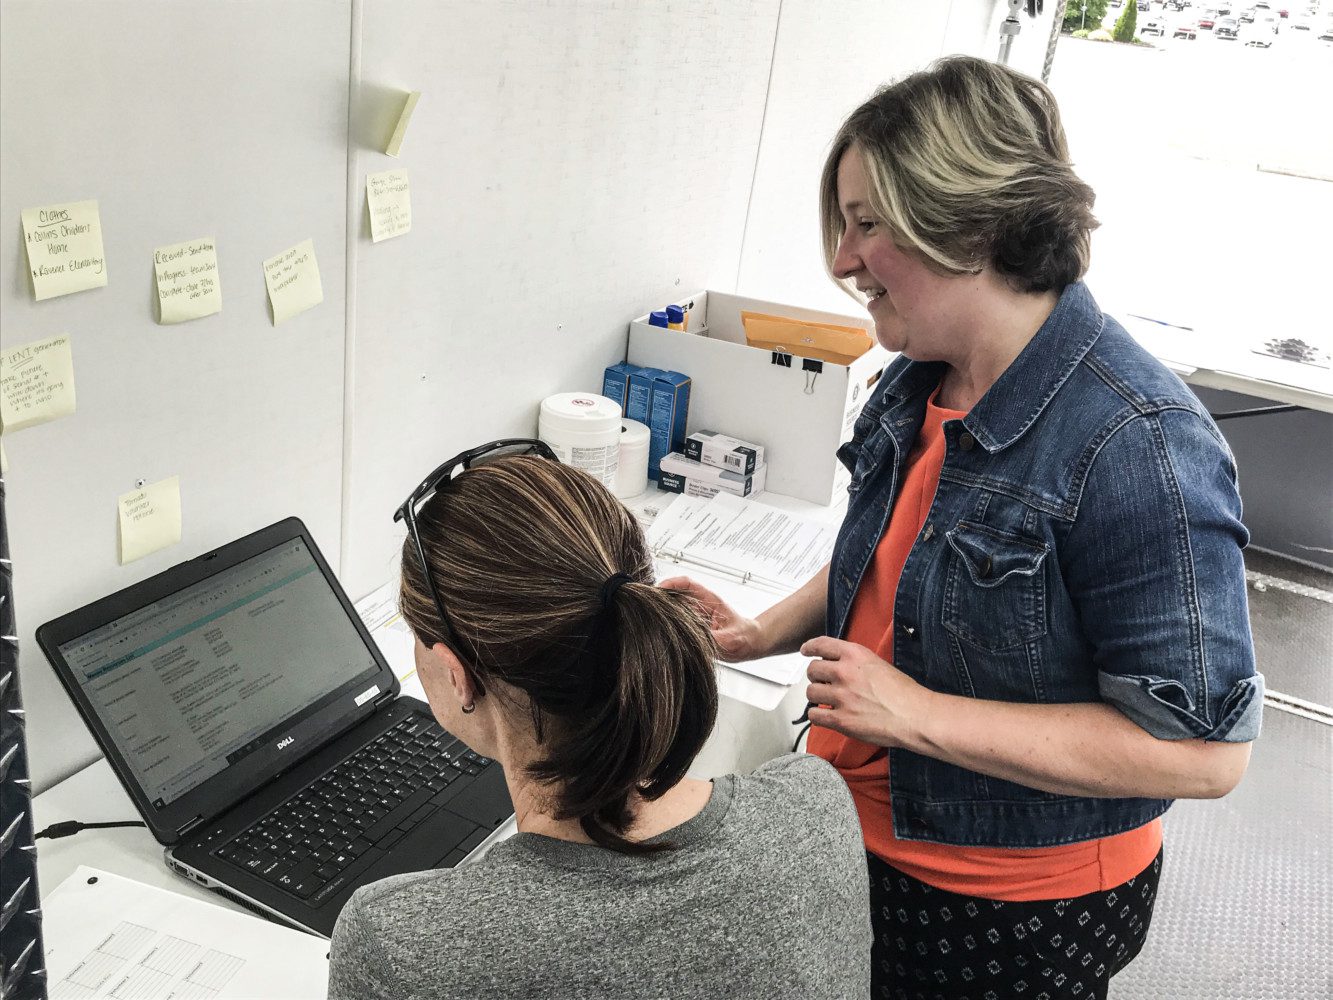 Alanna Landreth (standing) shows Vicki Roberts how to log an incoming work request for Oconee County Emergency Services. The two are among 40+ employee volunteers from Clemson University aiding Seneca tornado victims.